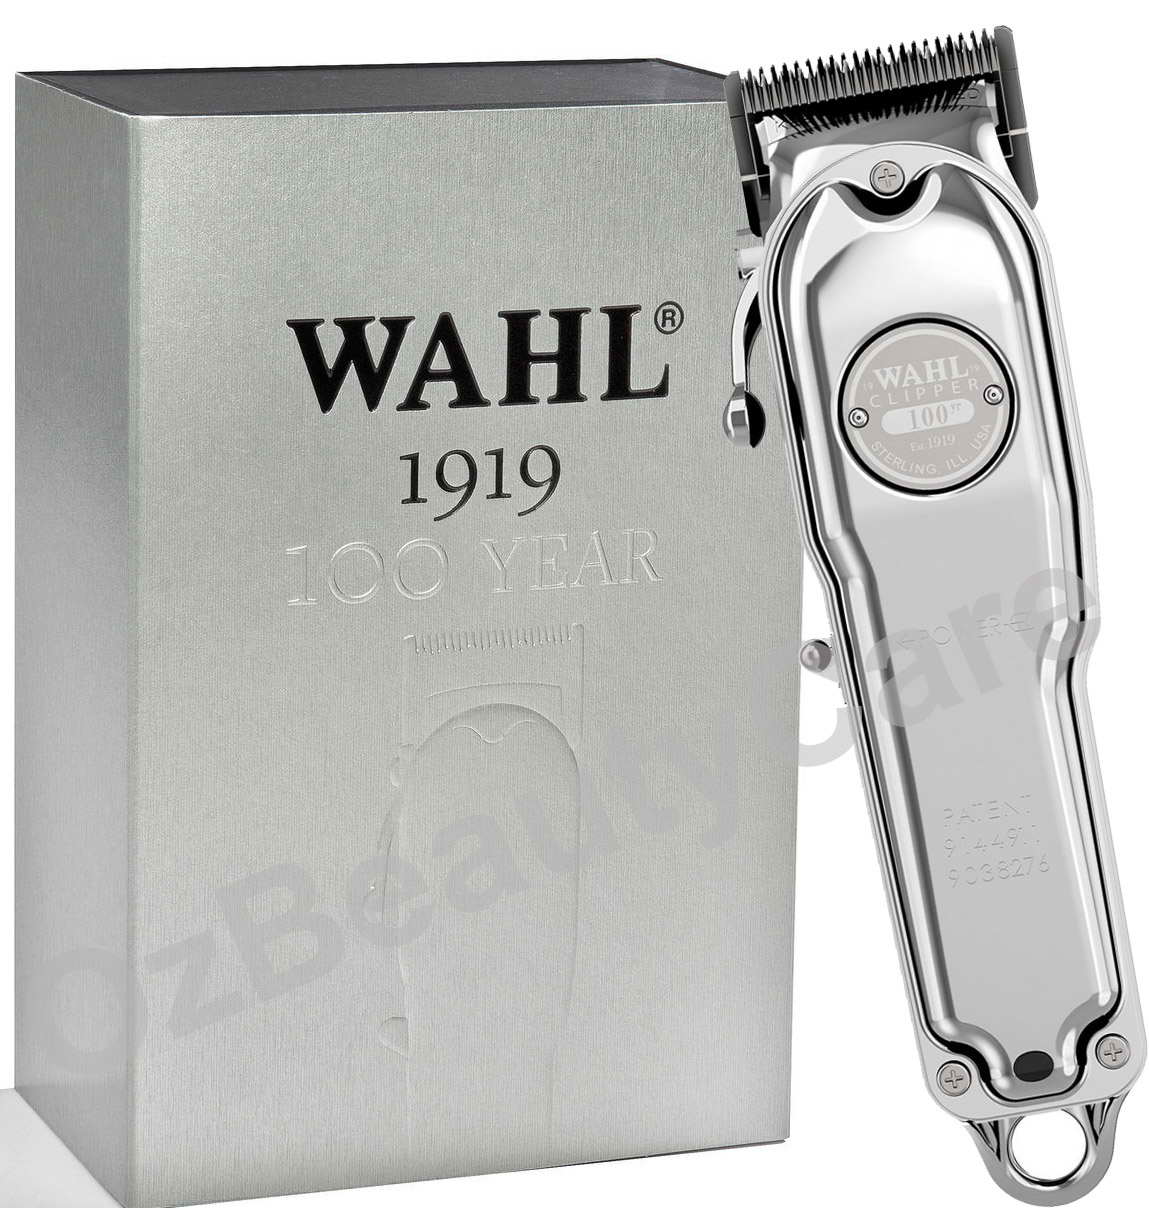 wahl 1919 review